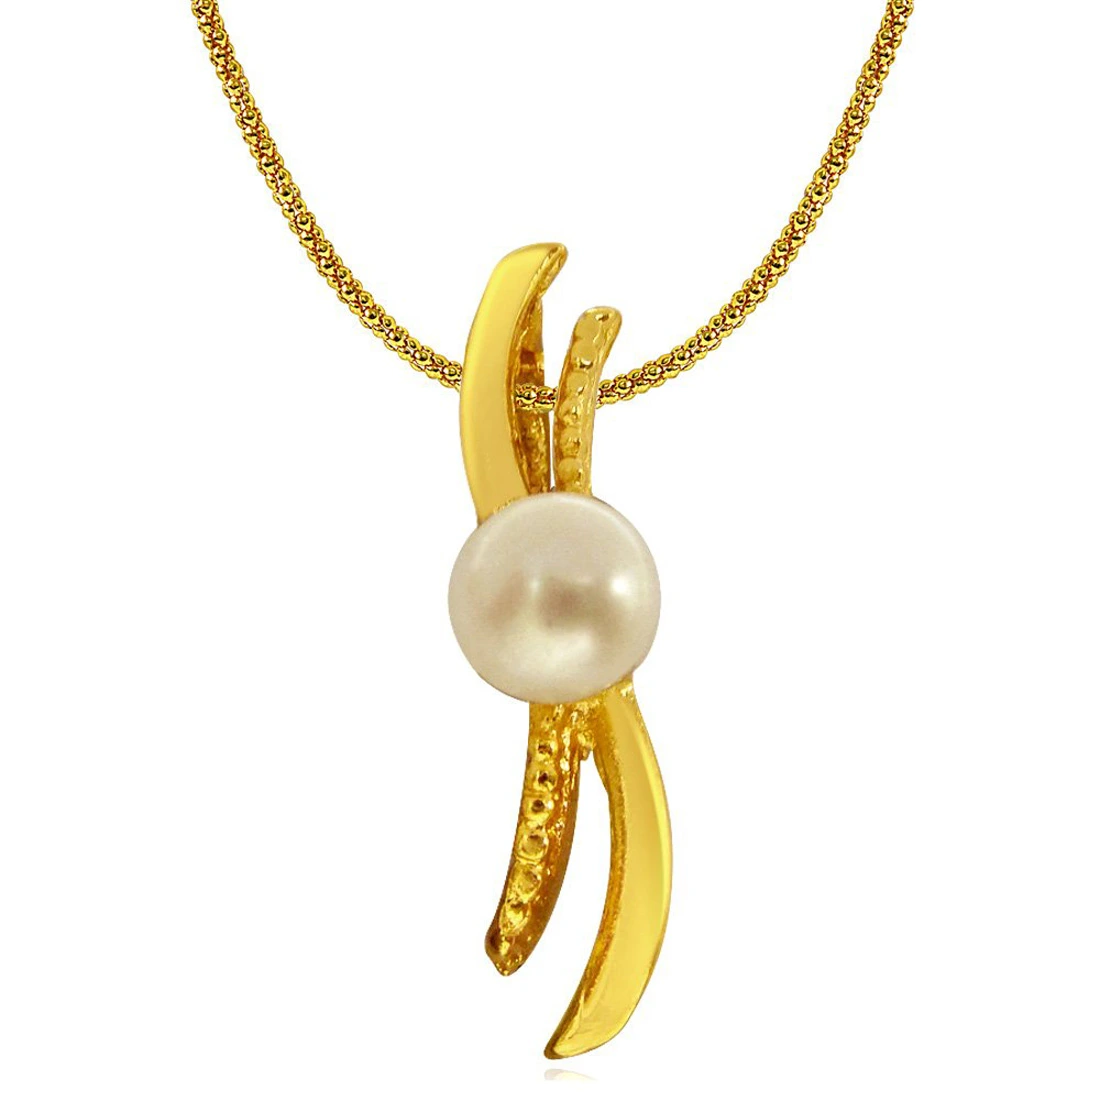 'S' Shape Button Pearl Pendant with chain & Pearl Studs for Women (SDS147)